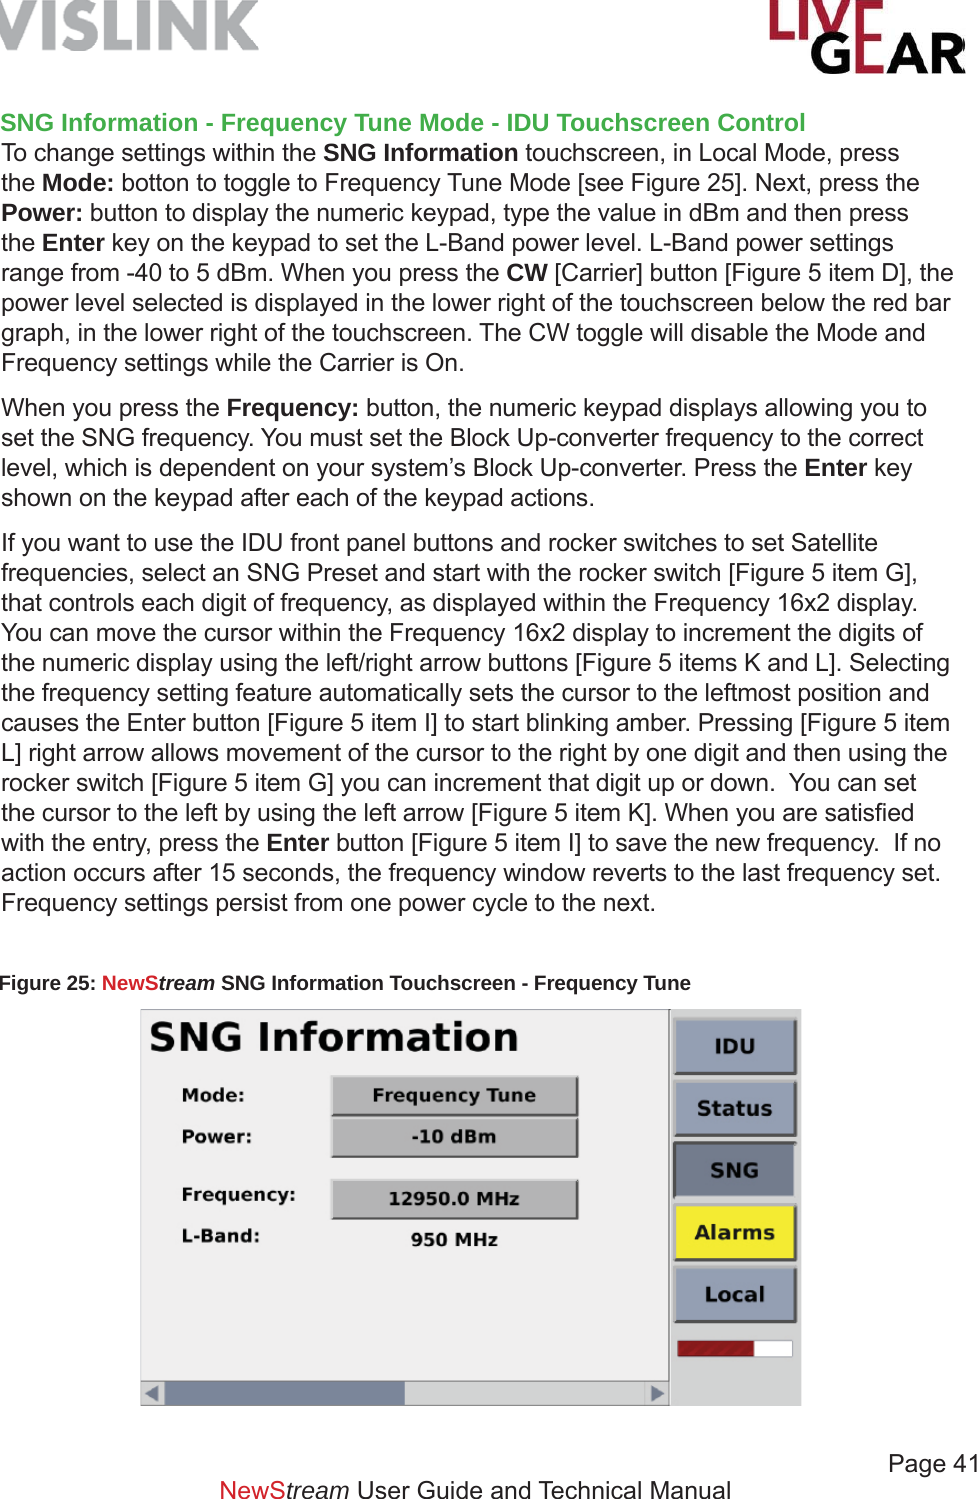             Page 41NewStream User Guide and Technical ManualFigure 25: NewStream SNG Information Touchscreen - Frequency Tune SNG Information - Frequency Tune Mode - IDU Touchscreen ControlTo change settings within the SNG Information touchscreen, in Local Mode, press the Mode: botton to toggle to Frequency Tune Mode [see Figure 25]. Next, press the Power: button to display the numeric keypad, type the value in dBm and then press the Enter key on the keypad to set the L-Band power level. L-Band power settings range from -40 to 5 dBm. When you press the CW [Carrier] button [Figure 5 item D], the power level selected is displayed in the lower right of the touchscreen below the red bar graph, in the lower right of the touchscreen. The CW toggle will disable the Mode and Frequency settings while the Carrier is On. When you press the Frequency: button, the numeric keypad displays allowing you to set the SNG frequency. You must set the Block Up-converter frequency to the correct level, which is dependent on your system’s Block Up-converter. Press the Enter key shown on the keypad after each of the keypad actions.If you want to use the IDU front panel buttons and rocker switches to set Satellite frequencies, select an SNG Preset and start with the rocker switch [Figure 5 item G], that controls each digit of frequency, as displayed within the Frequency 16x2 display. You can move the cursor within the Frequency 16x2 display to increment the digits of the numeric display using the left/right arrow buttons [Figure 5 items K and L]. Selecting the frequency setting feature automatically sets the cursor to the leftmost position and causes the Enter button [Figure 5 item I] to start blinking amber. Pressing [Figure 5 item L] right arrow allows movement of the cursor to the right by one digit and then using the rocker switch [Figure 5 item G] you can increment that digit up or down.  You can set the cursor to the left by using the left arrow [Figure 5 item K]. When you are satisﬁ ed with the entry, press the Enter button [Figure 5 item I] to save the new frequency.  If no action occurs after 15 seconds, the frequency window reverts to the last frequency set.  Frequency settings persist from one power cycle to the next.